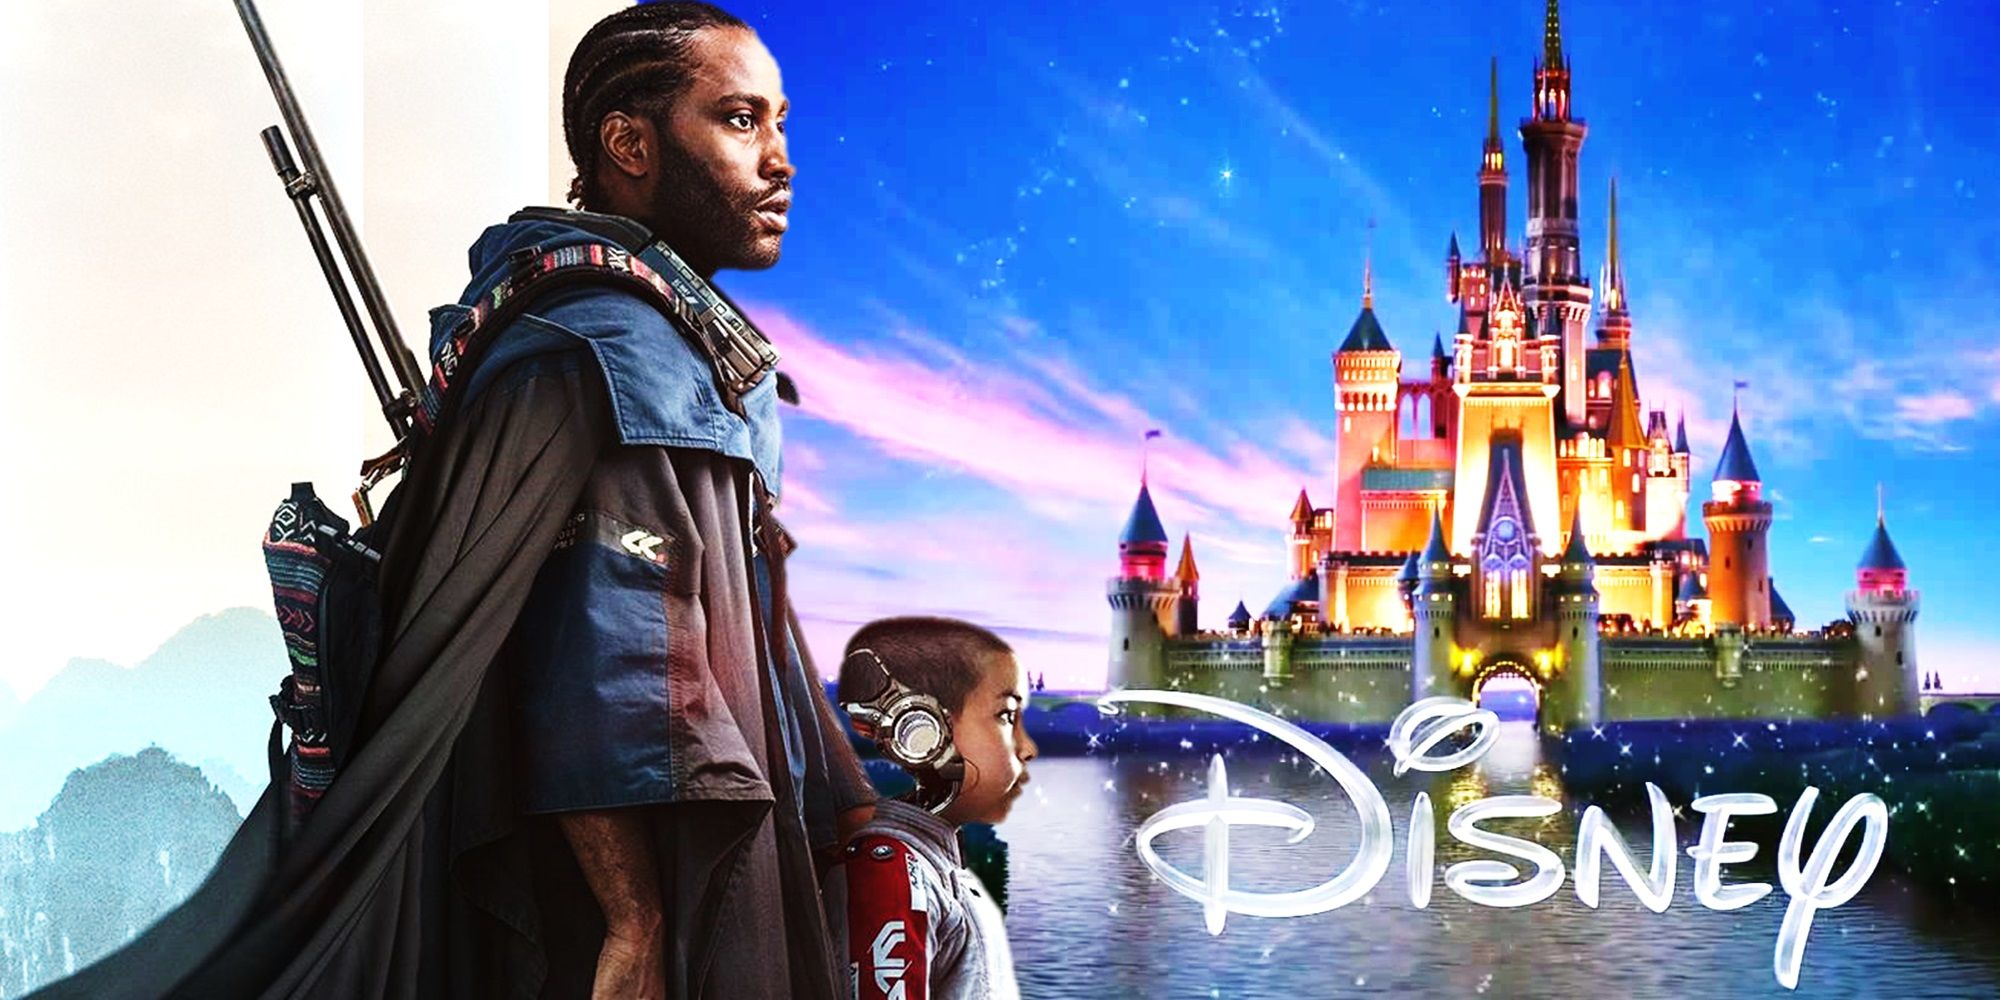 The poster for The Creator juxtaposed with the Disney logo